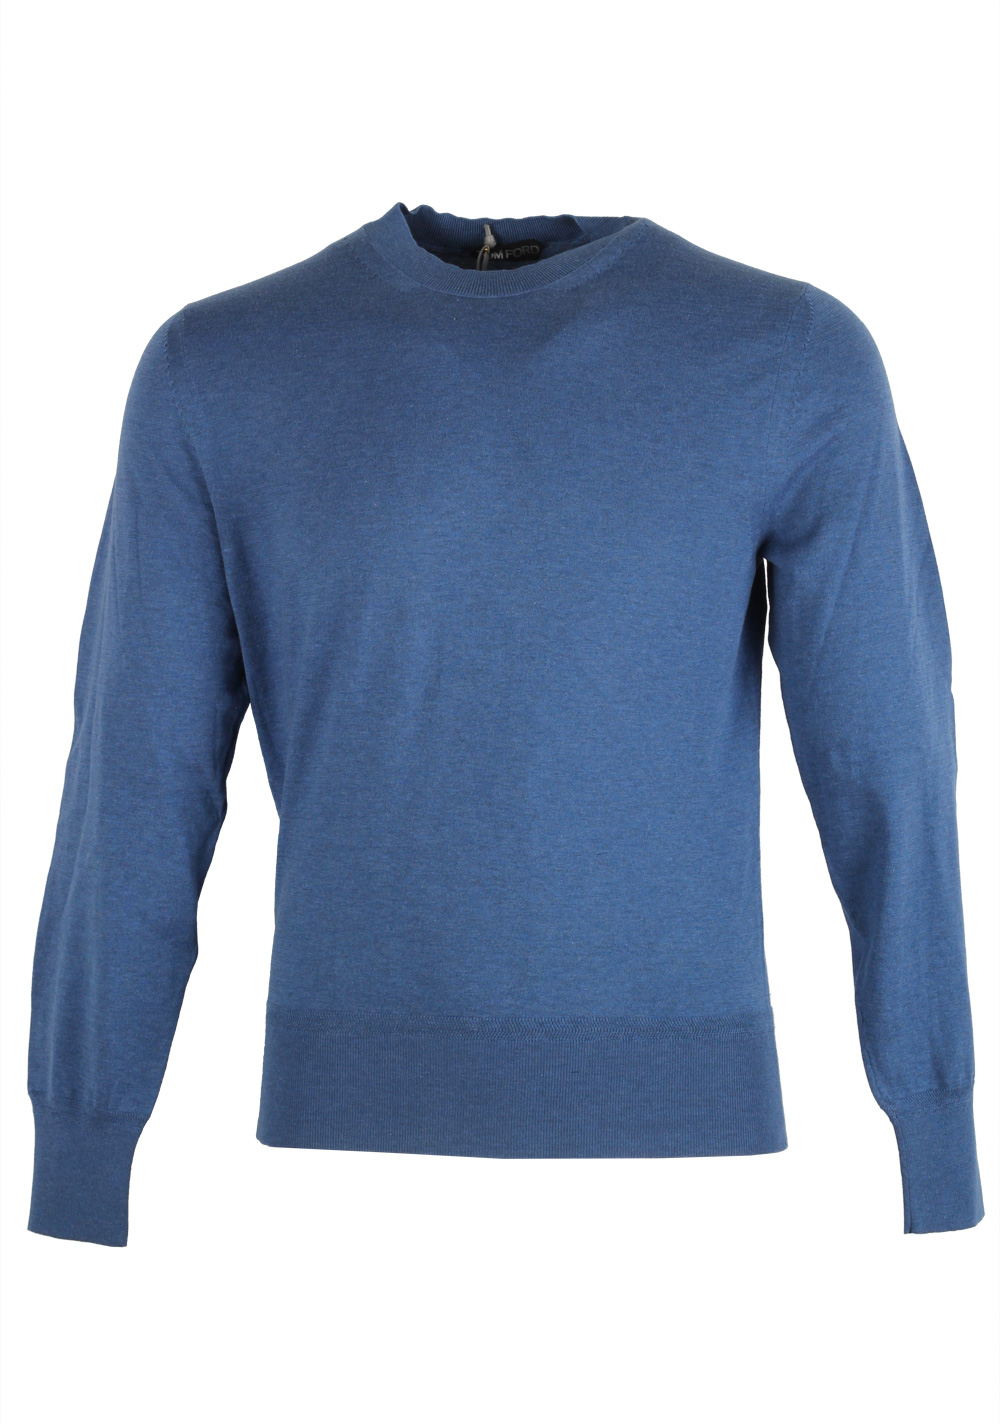 TOM FORD Blue Crew Neck Sweater Size 48 / 38R U.S. In Cotton | Costume ...